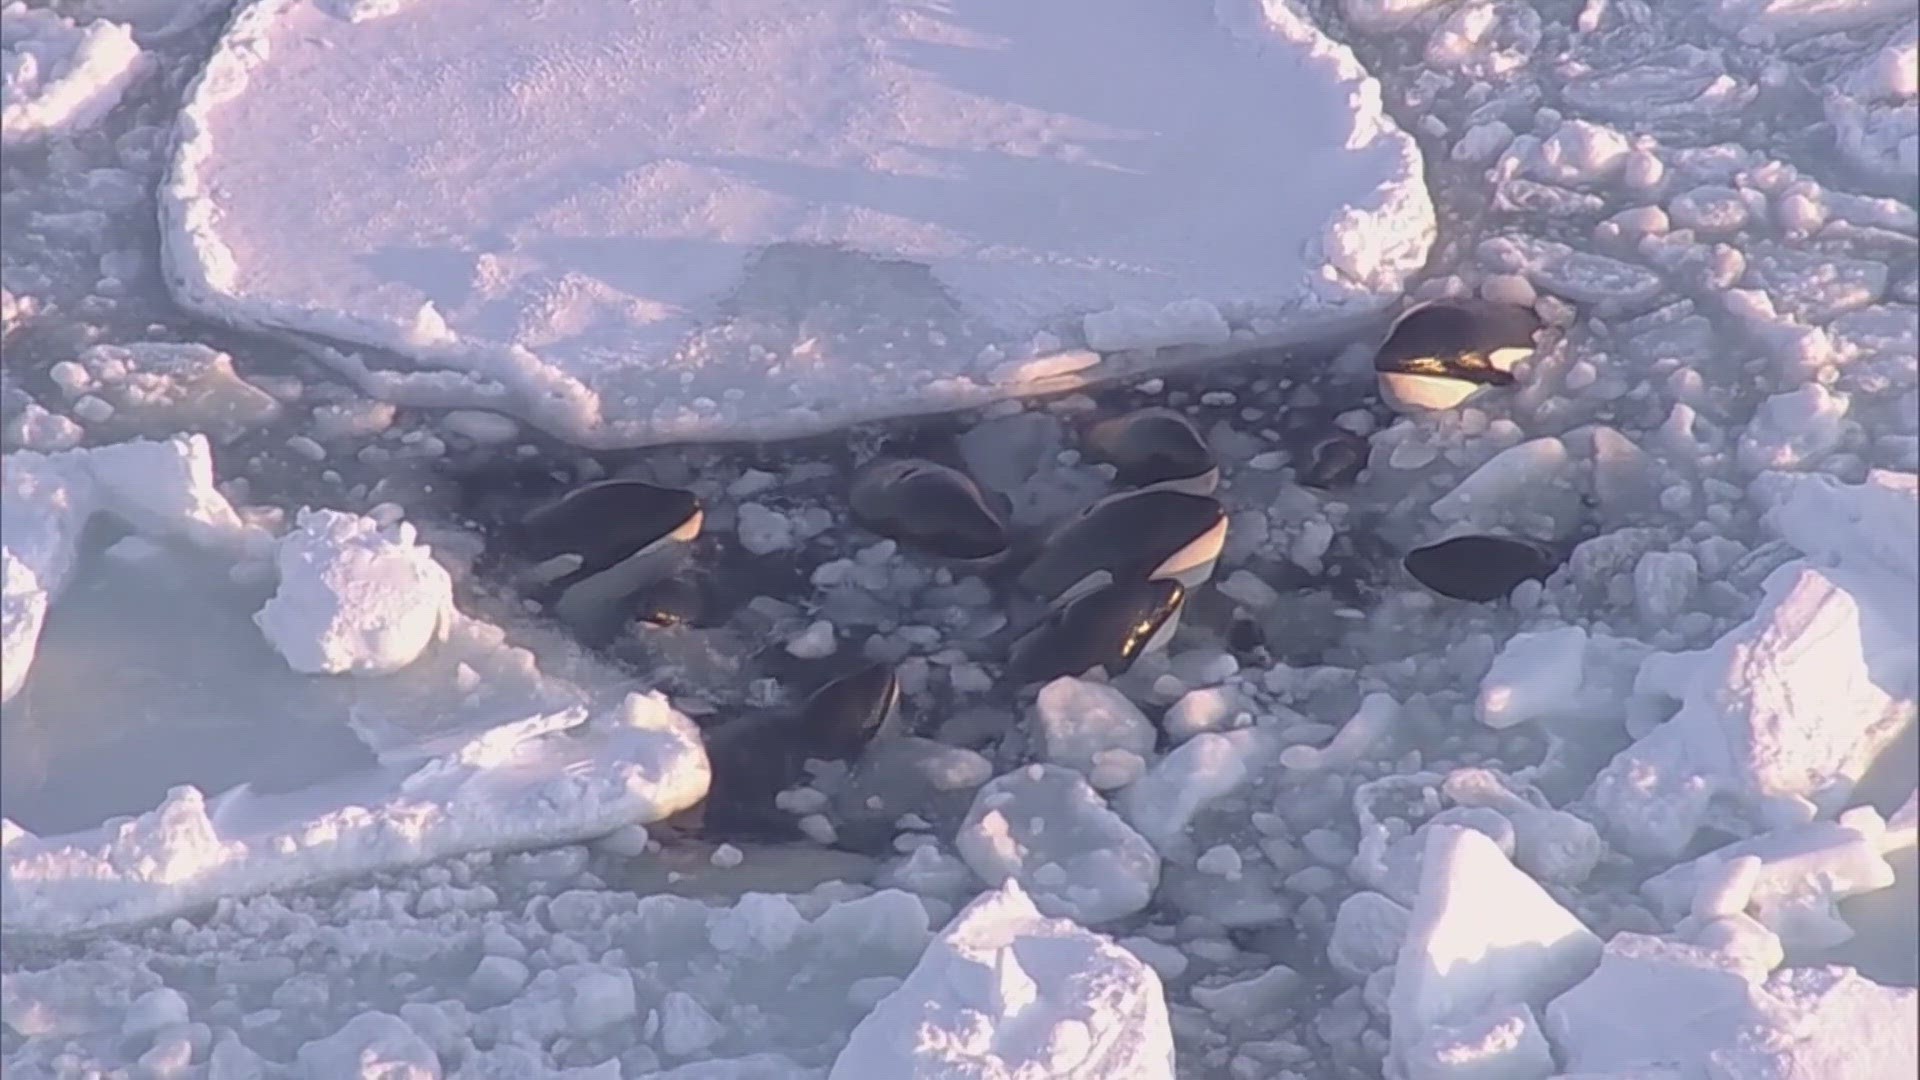 A pod of orcas off the coast of Hokkaido, Japan huddle together to avoid being trapped under sheets of drift ice